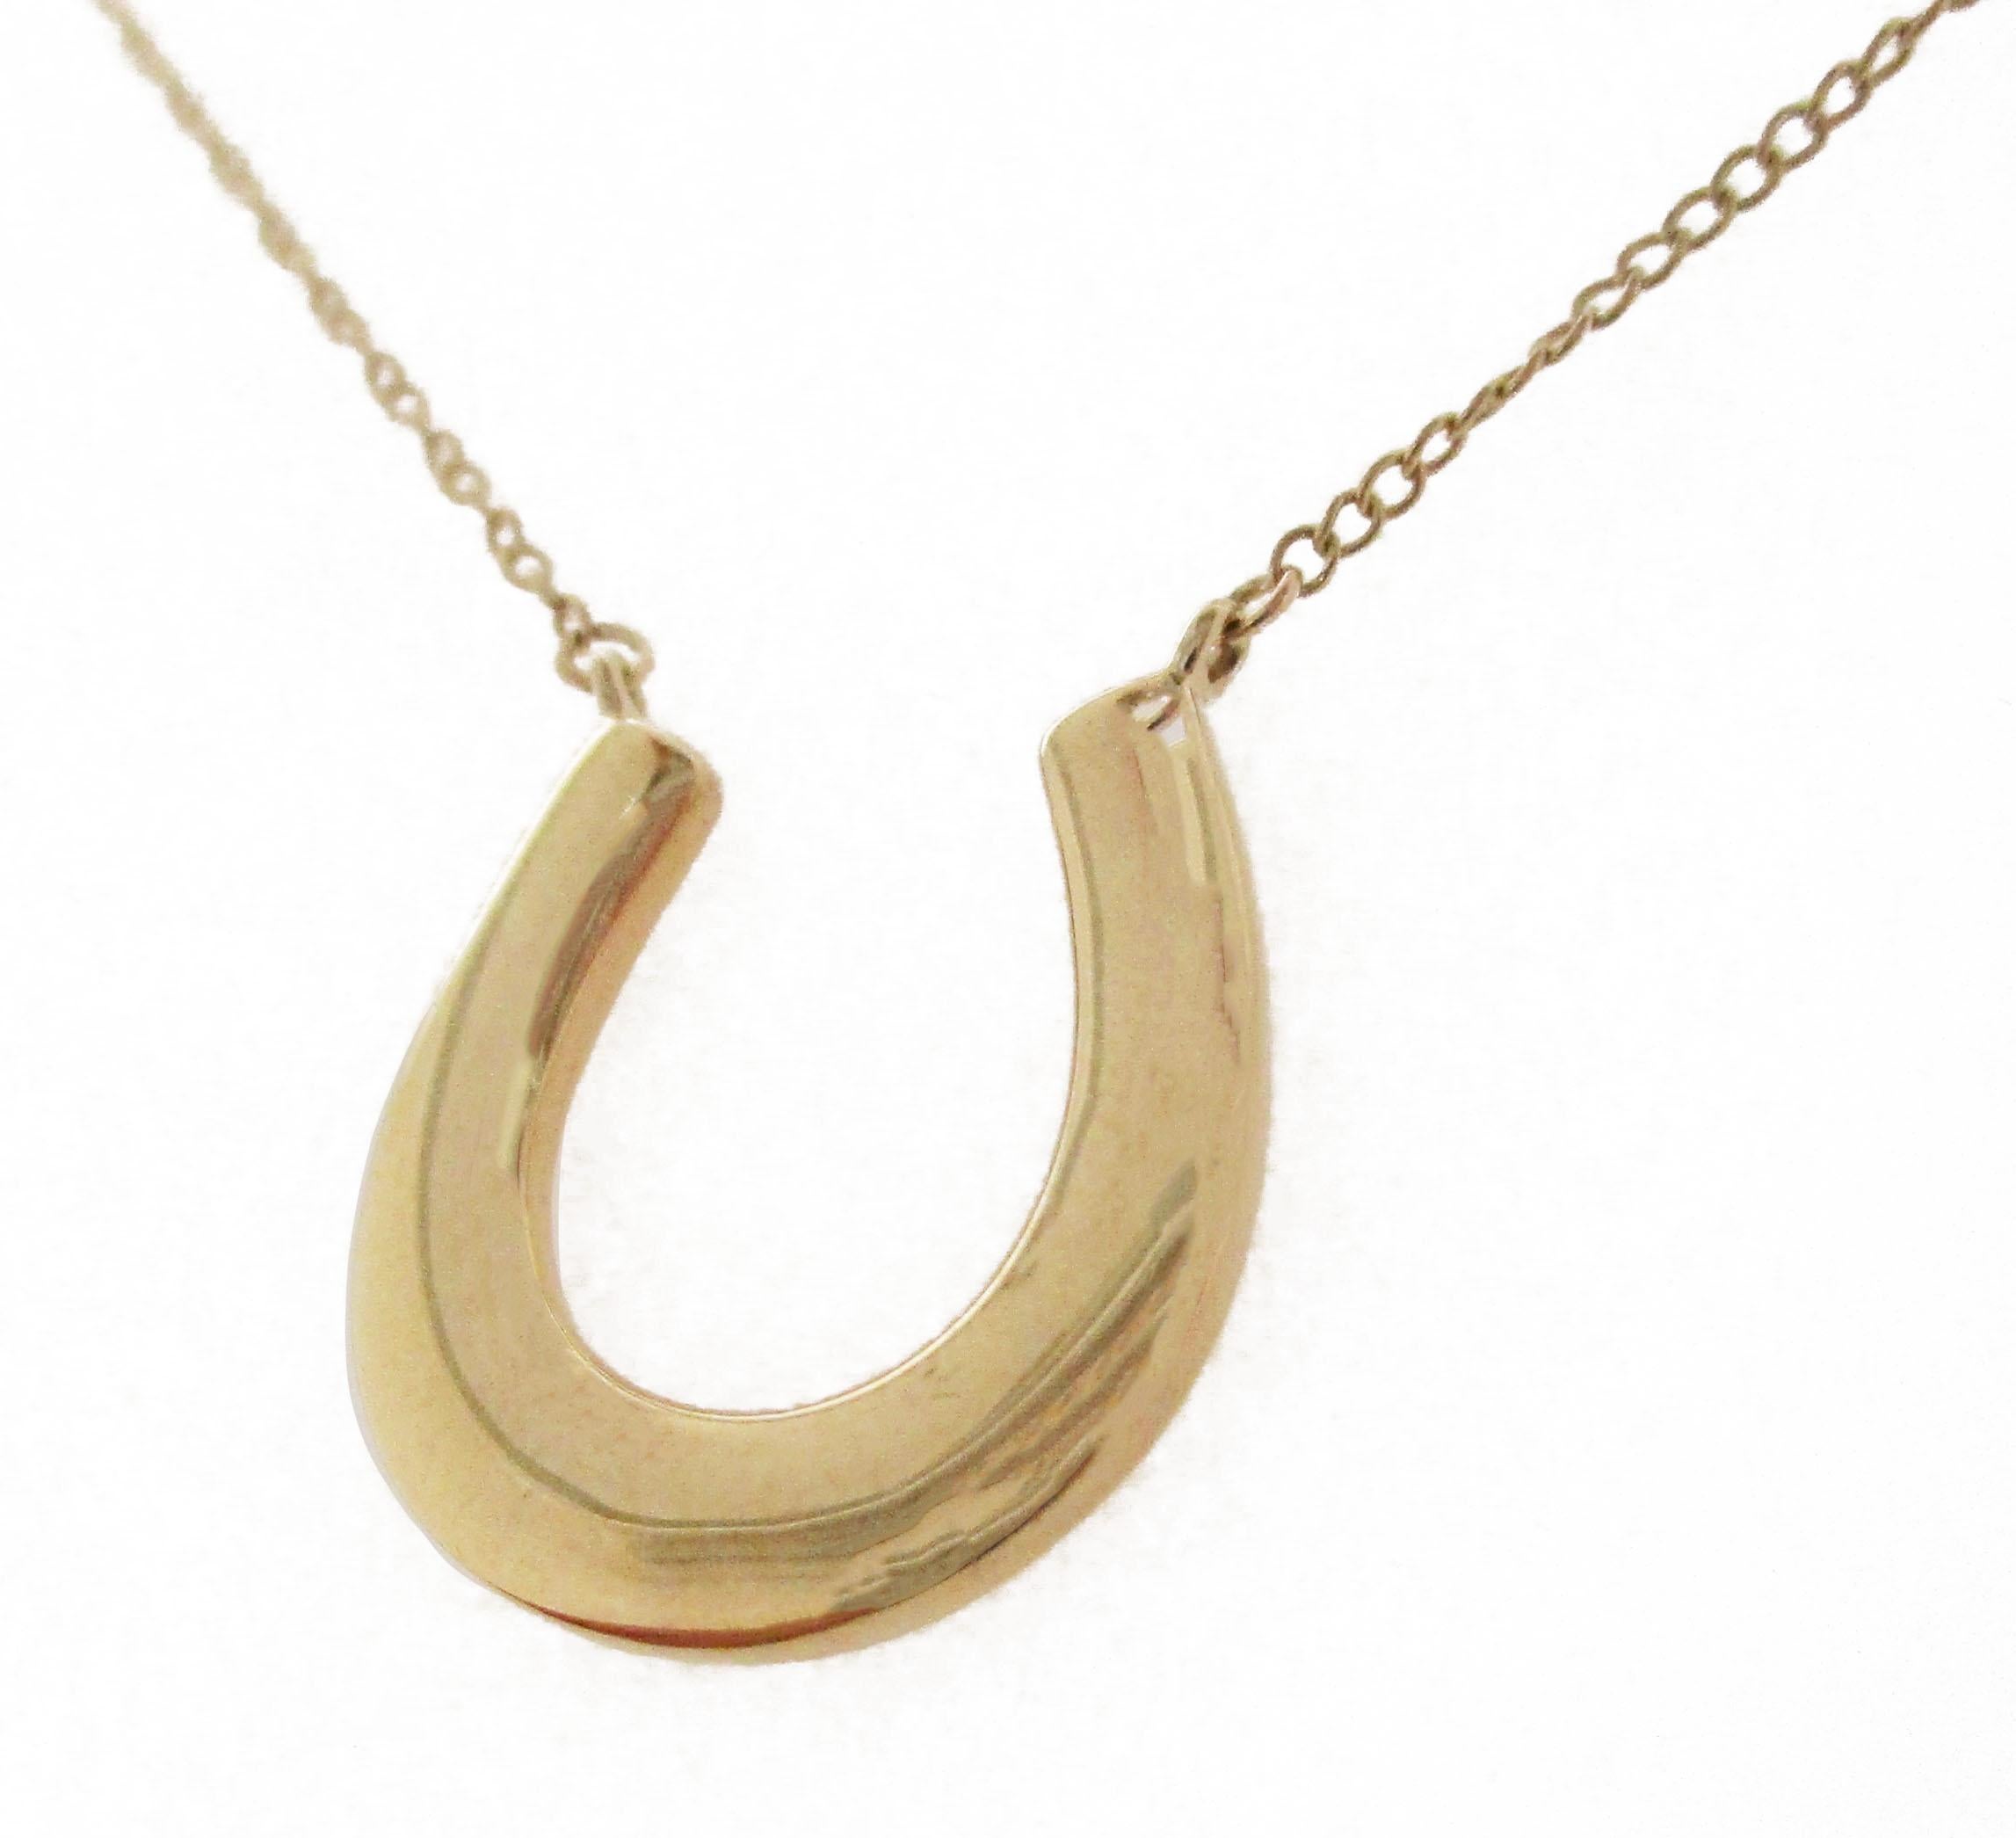 This gorgeous necklace brings all the charm of Tiffany & Co. as a stunning 18k yellow gold horseshoe! The 18k yellow gold horseshoe sits at the center of the necklace and is attached to the chain for a delicate, articulated finish! The smooth,